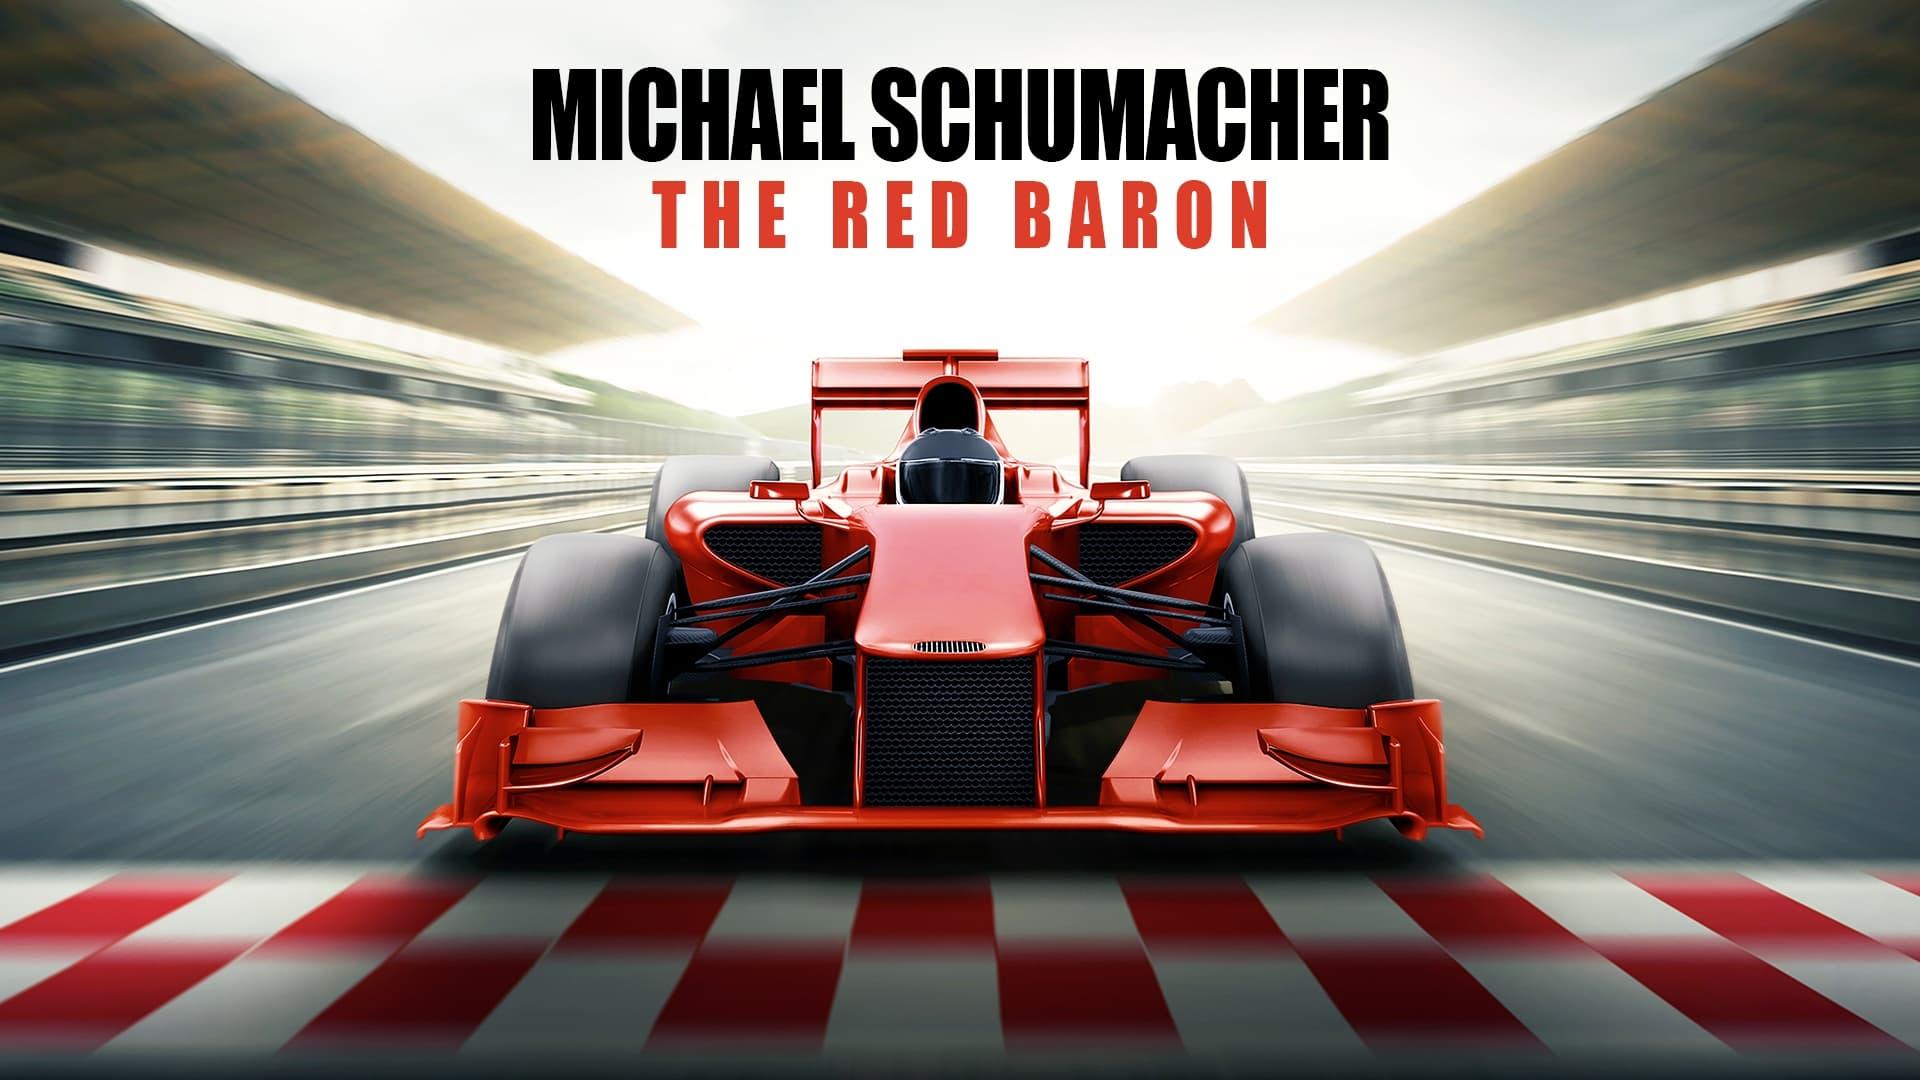 Michael Schumacher: The Red Baron backdrop